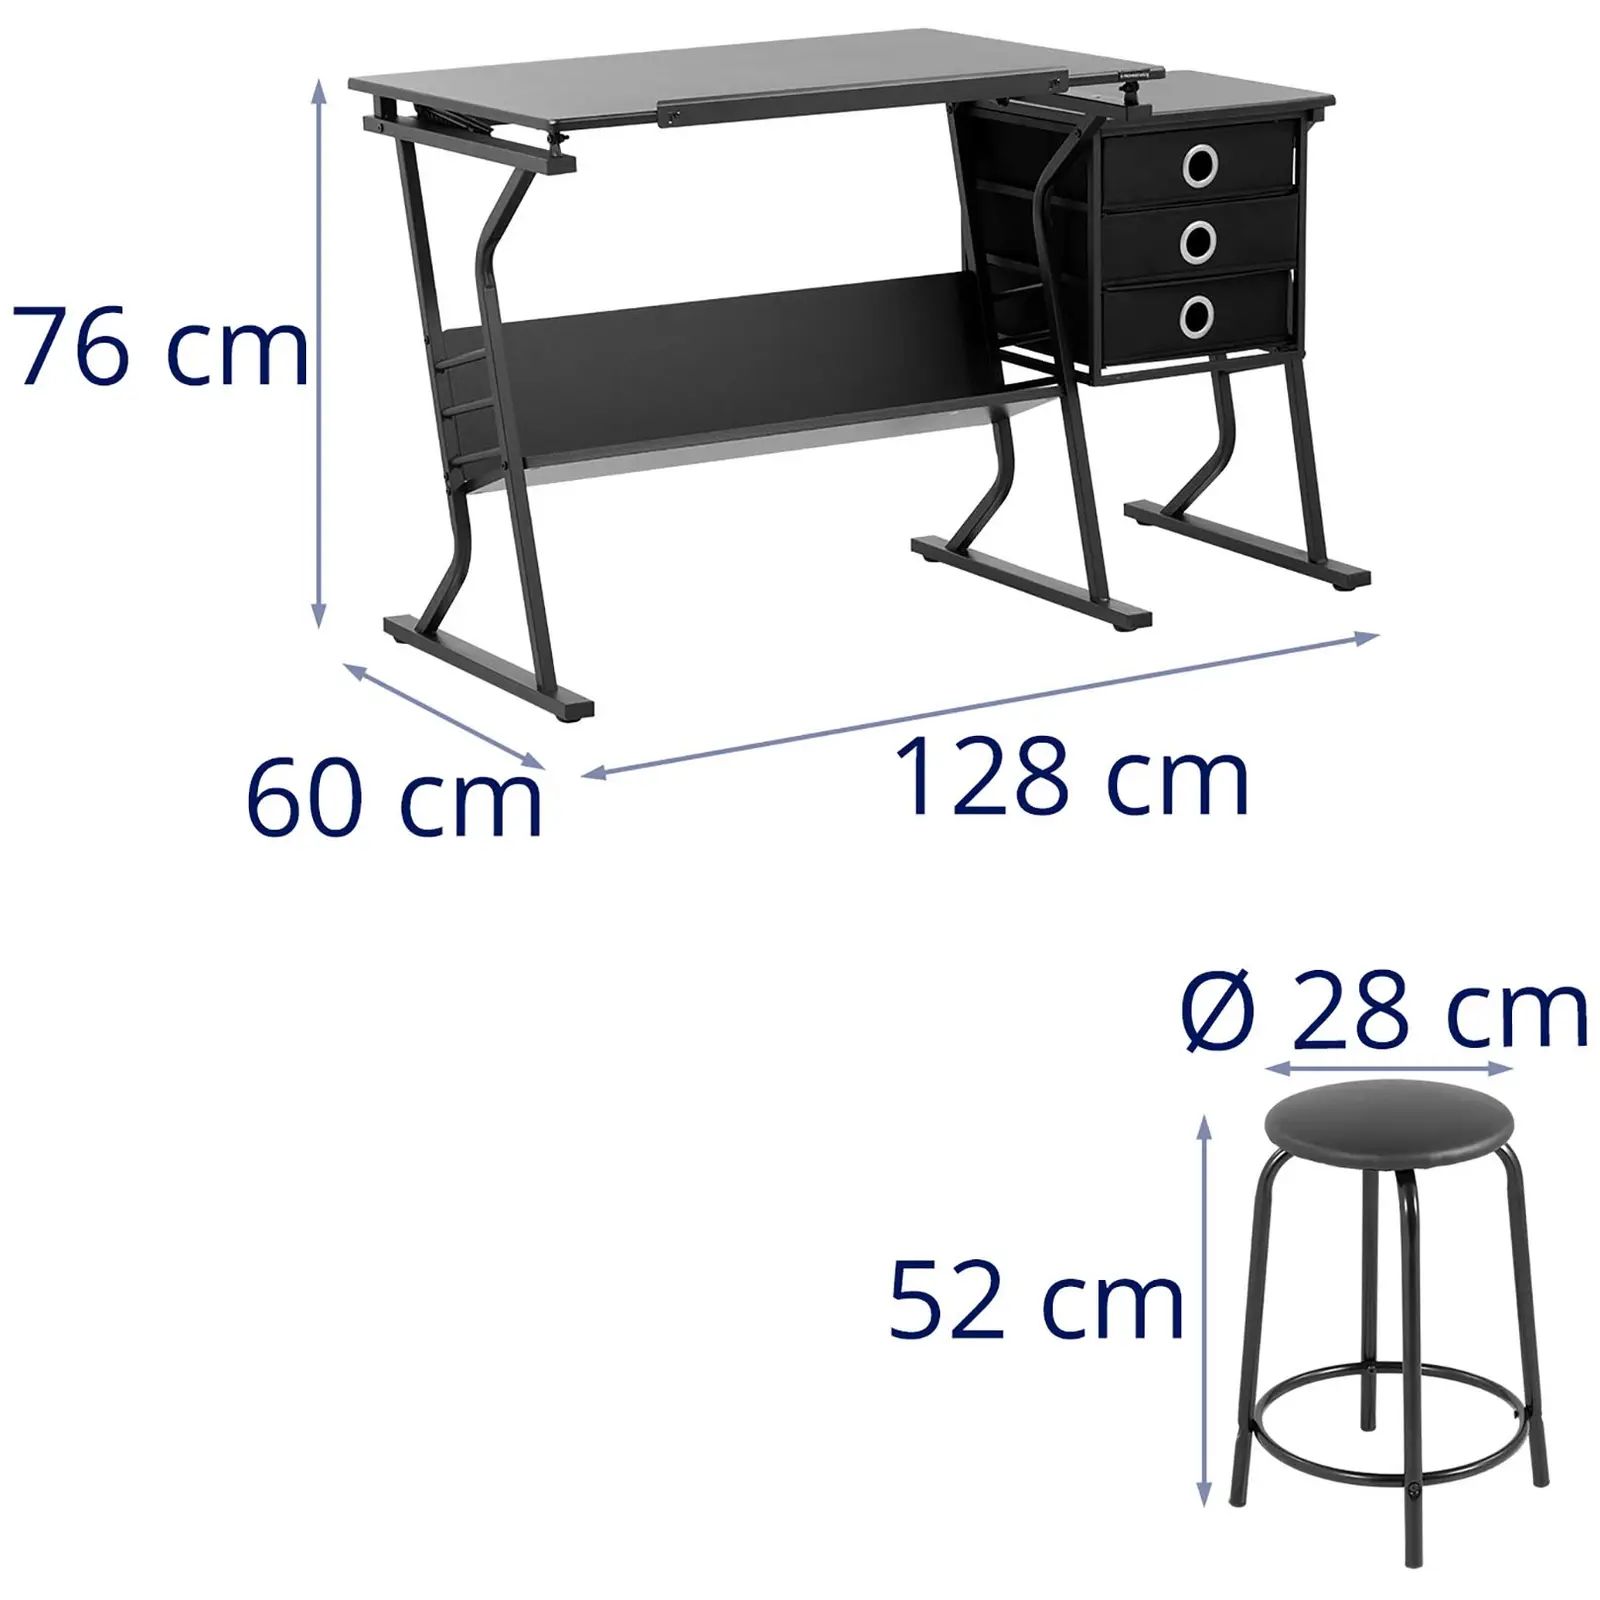 Factory second Drawing table - 90 x 60 cm - inclinable - stool and side table